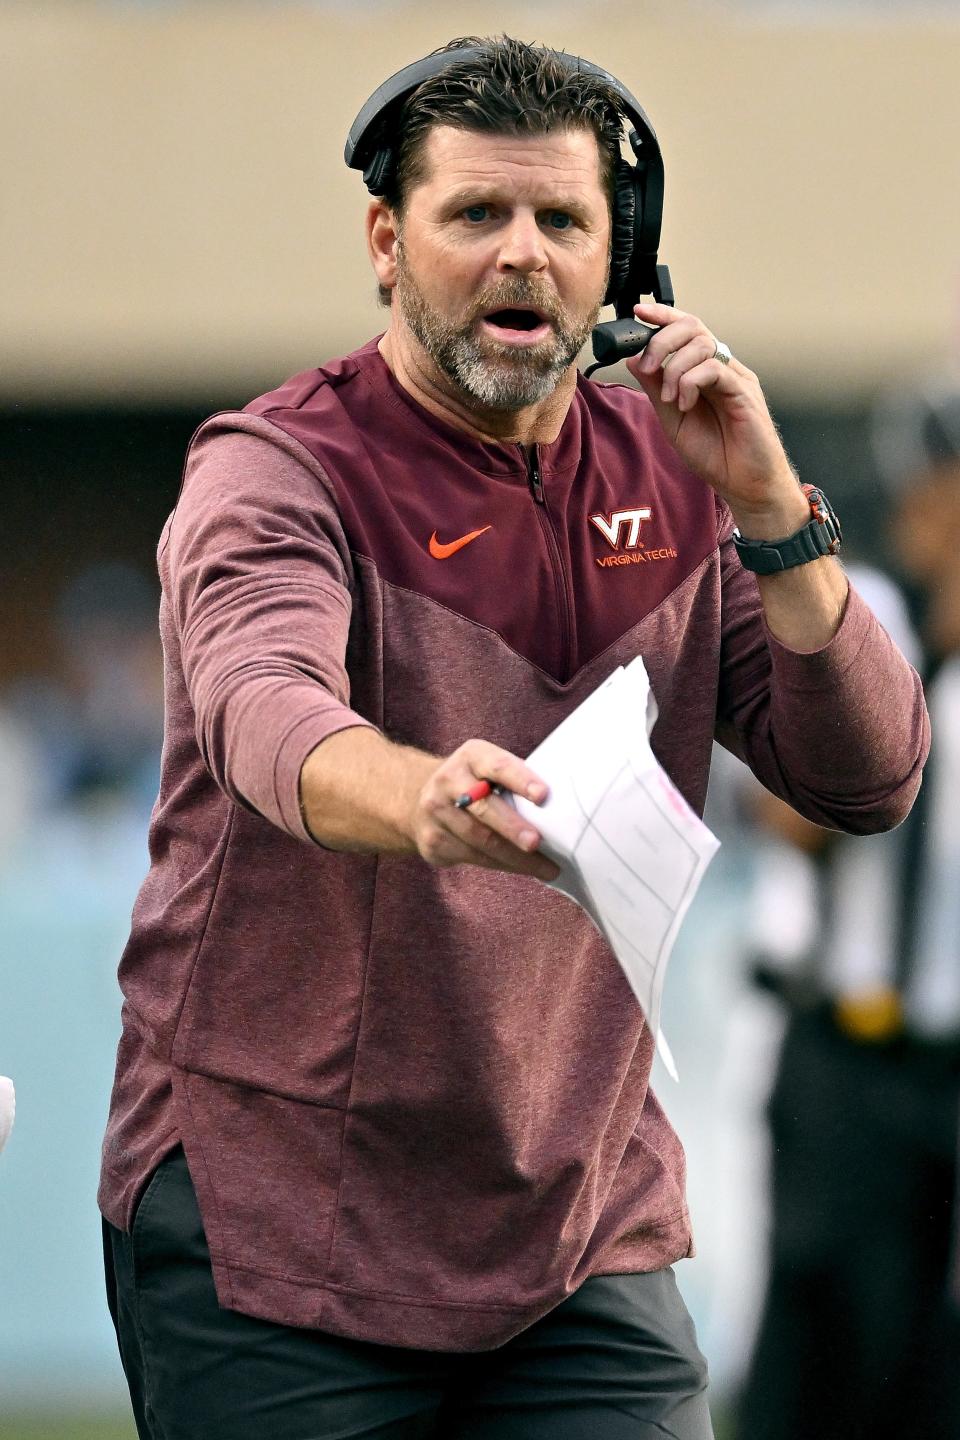 CHAPEL HILL, NORTH CAROLINA - OCTOBER 01: Head coach Brent Pry of the Virginia Tech Hokies  directs his team against the North Carolina Tar Heels during the second half of their game at Kenan Memorial Stadium on October 01, 2022 in Chapel Hill, North Carolina. (Photo by Grant Halverson/Getty Images)